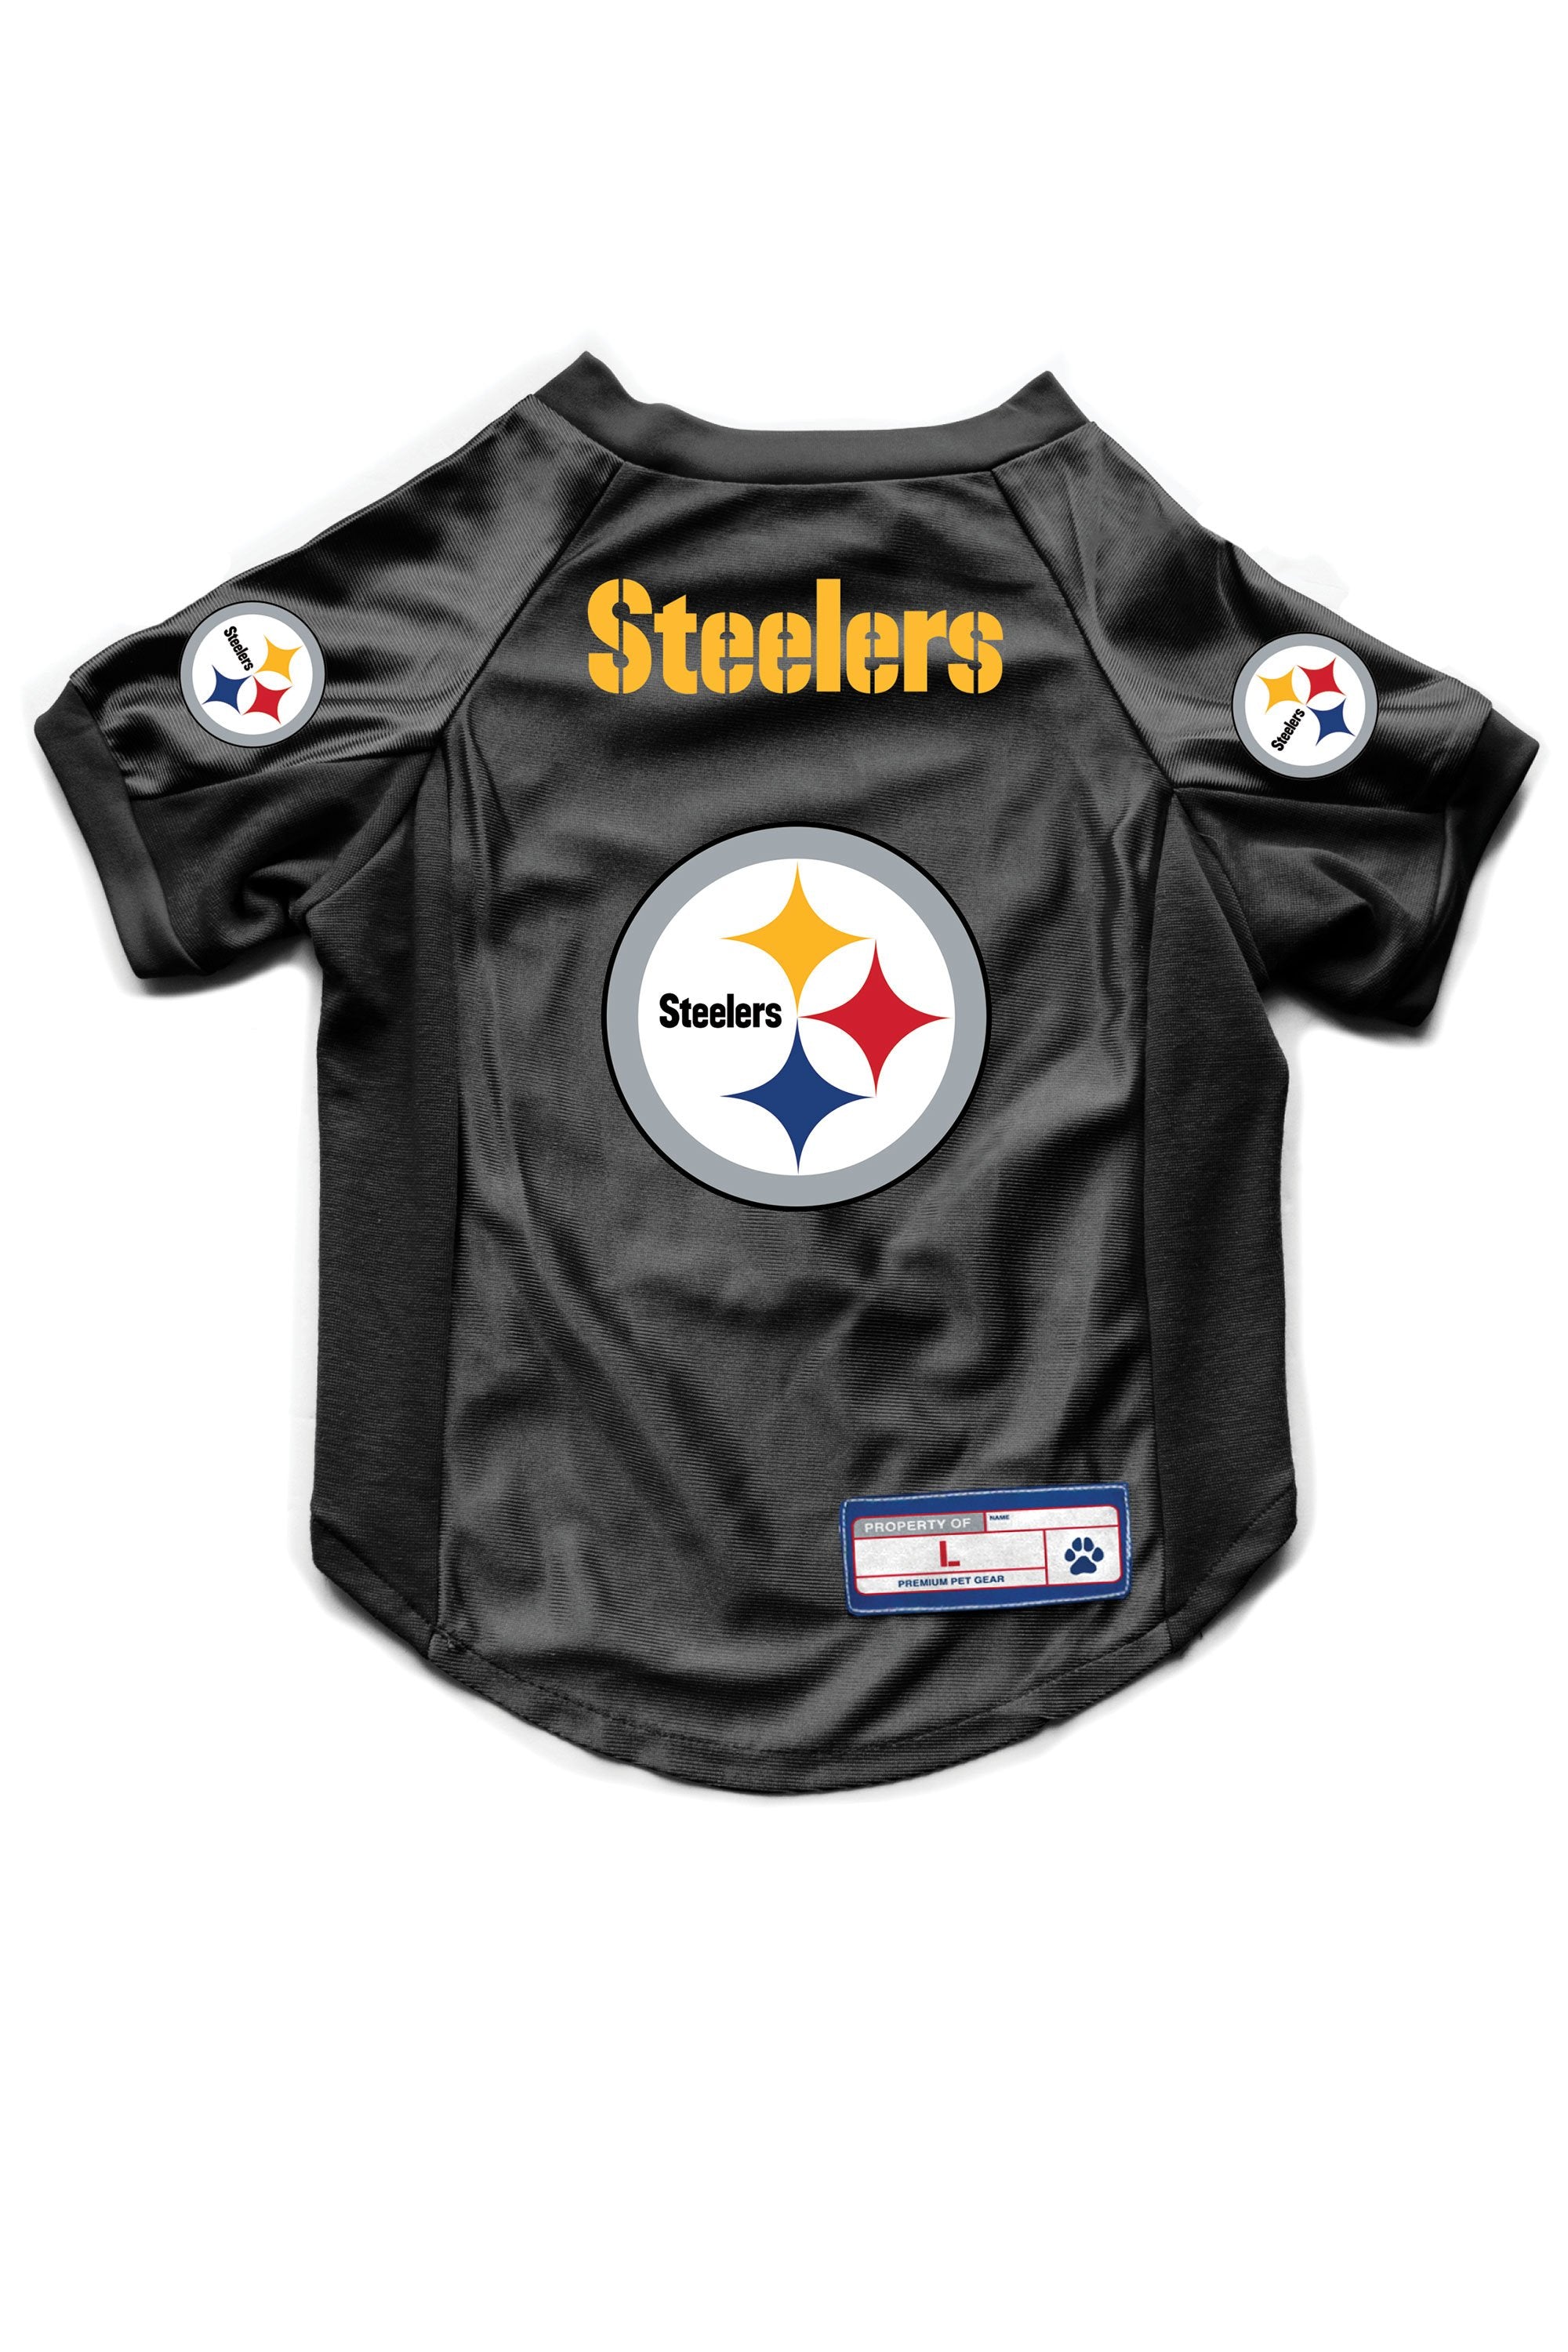 pittsburgh steelers third jersey